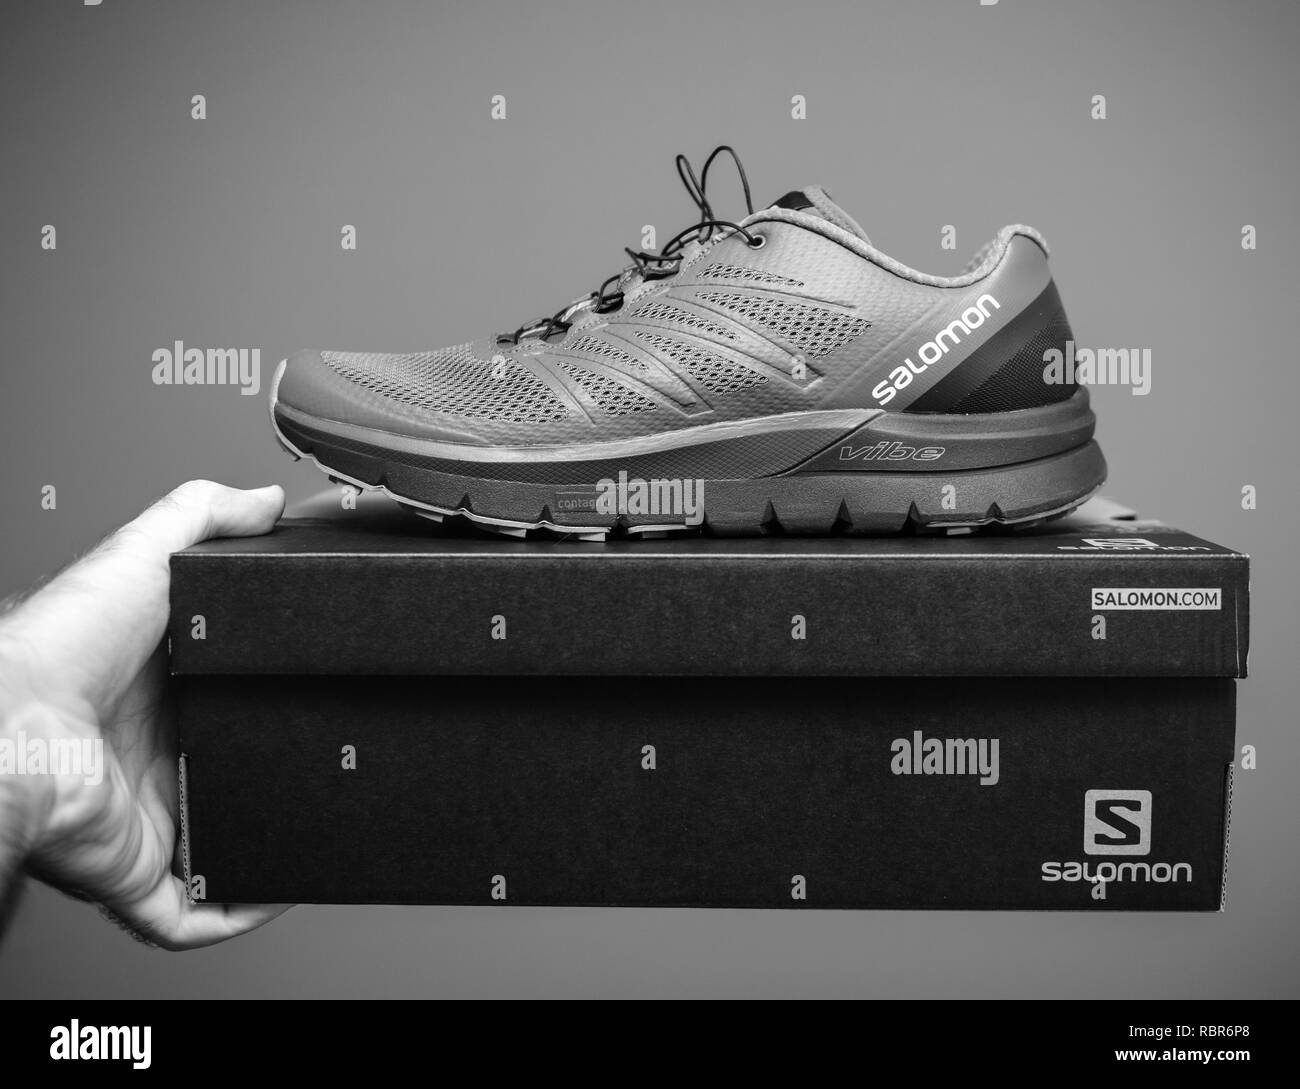 PARIS, FRANCE - NOV 22, 2018: Man holding against gray background a box with a of new Salomon Sense Pro everyday trail running performance with maximum cushioning black and